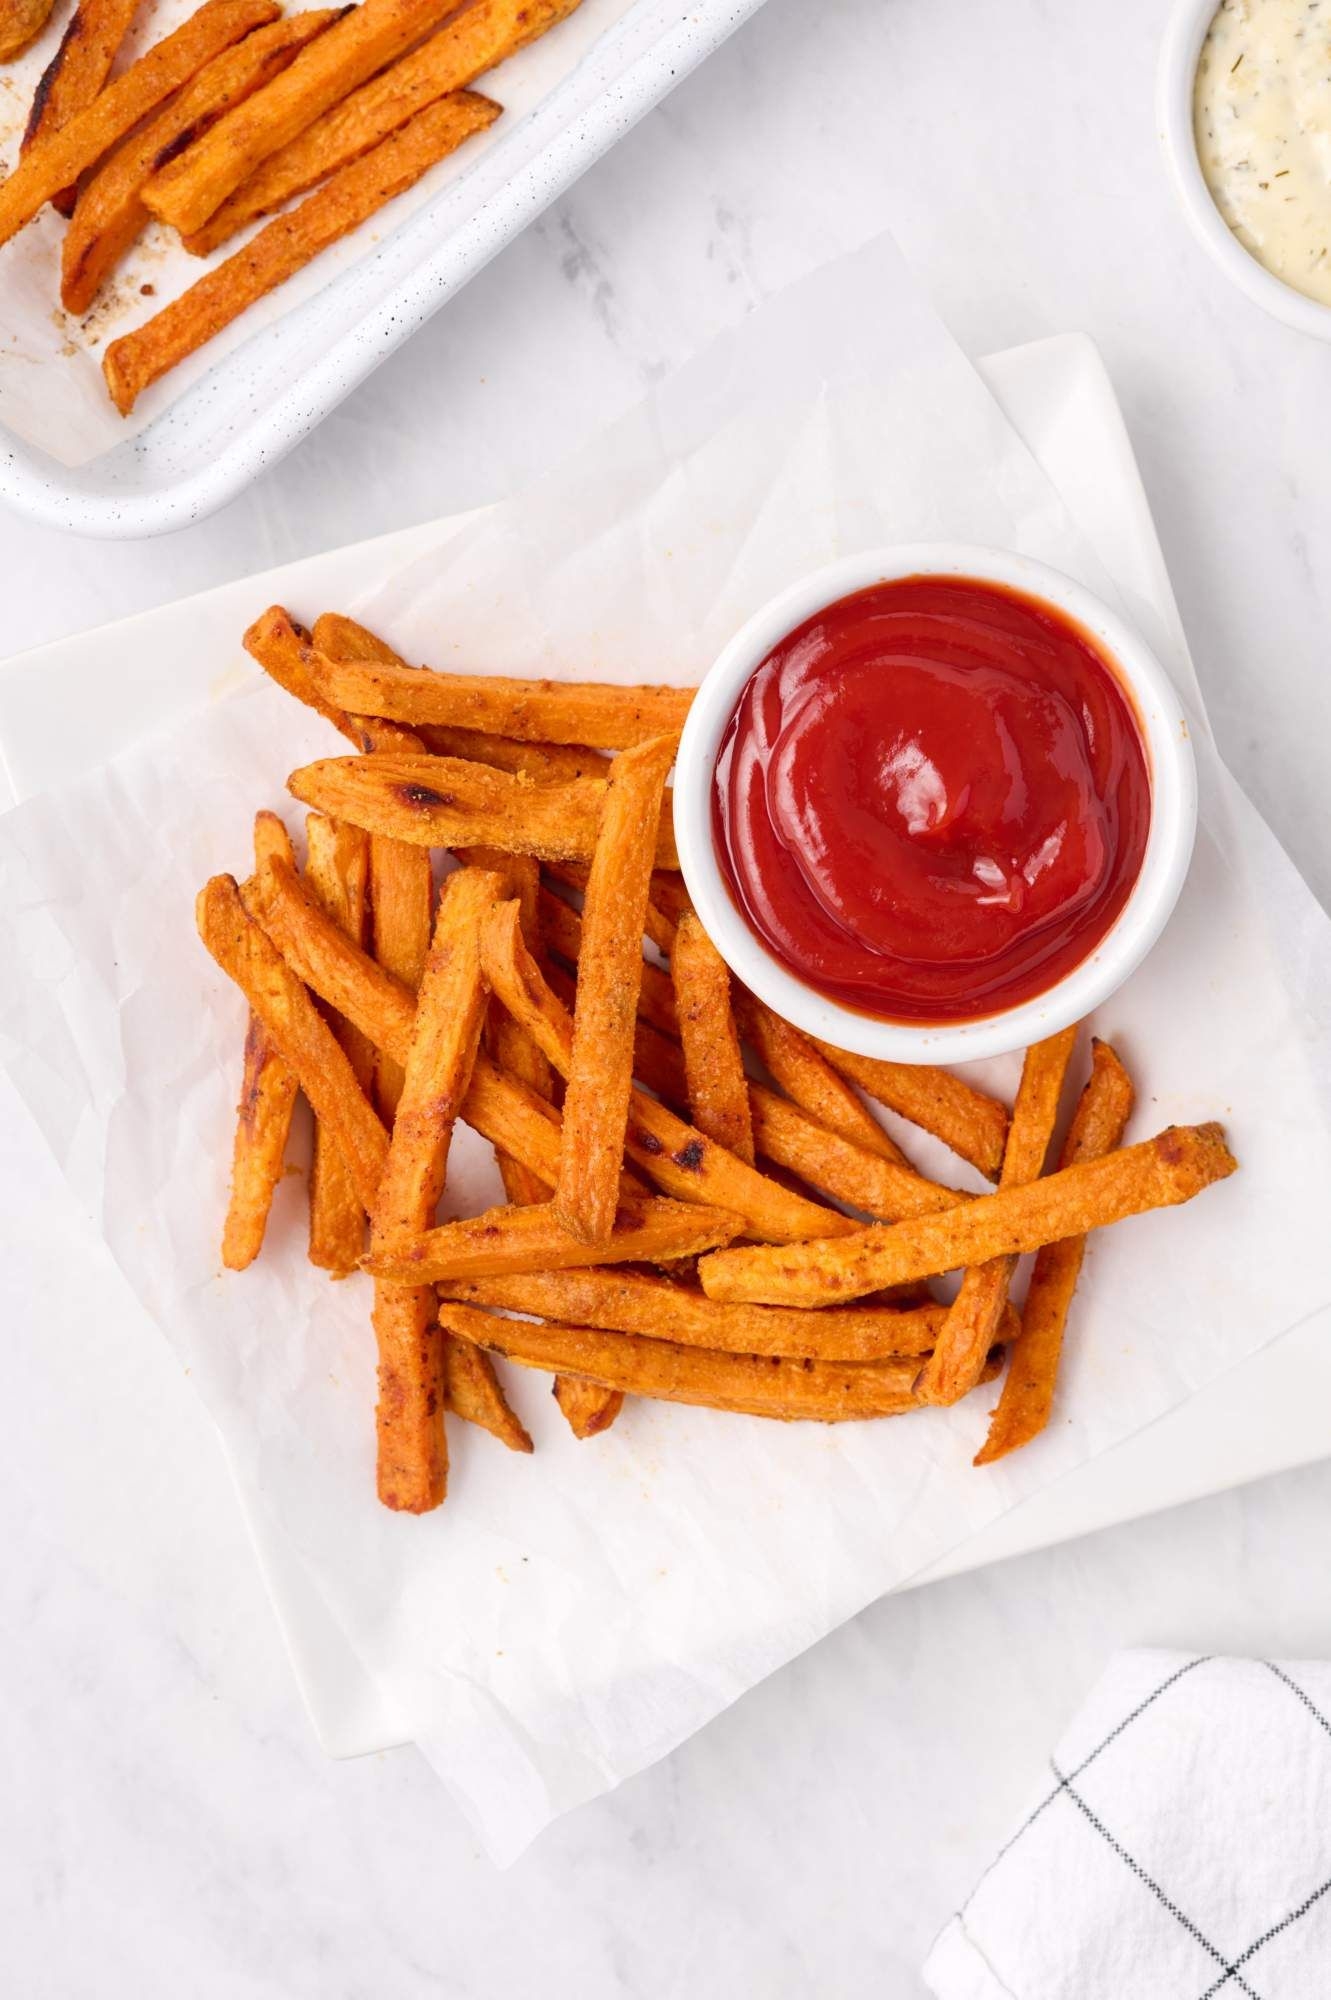 Oven baked sweet potato fries with ketchup served on parchment paper.